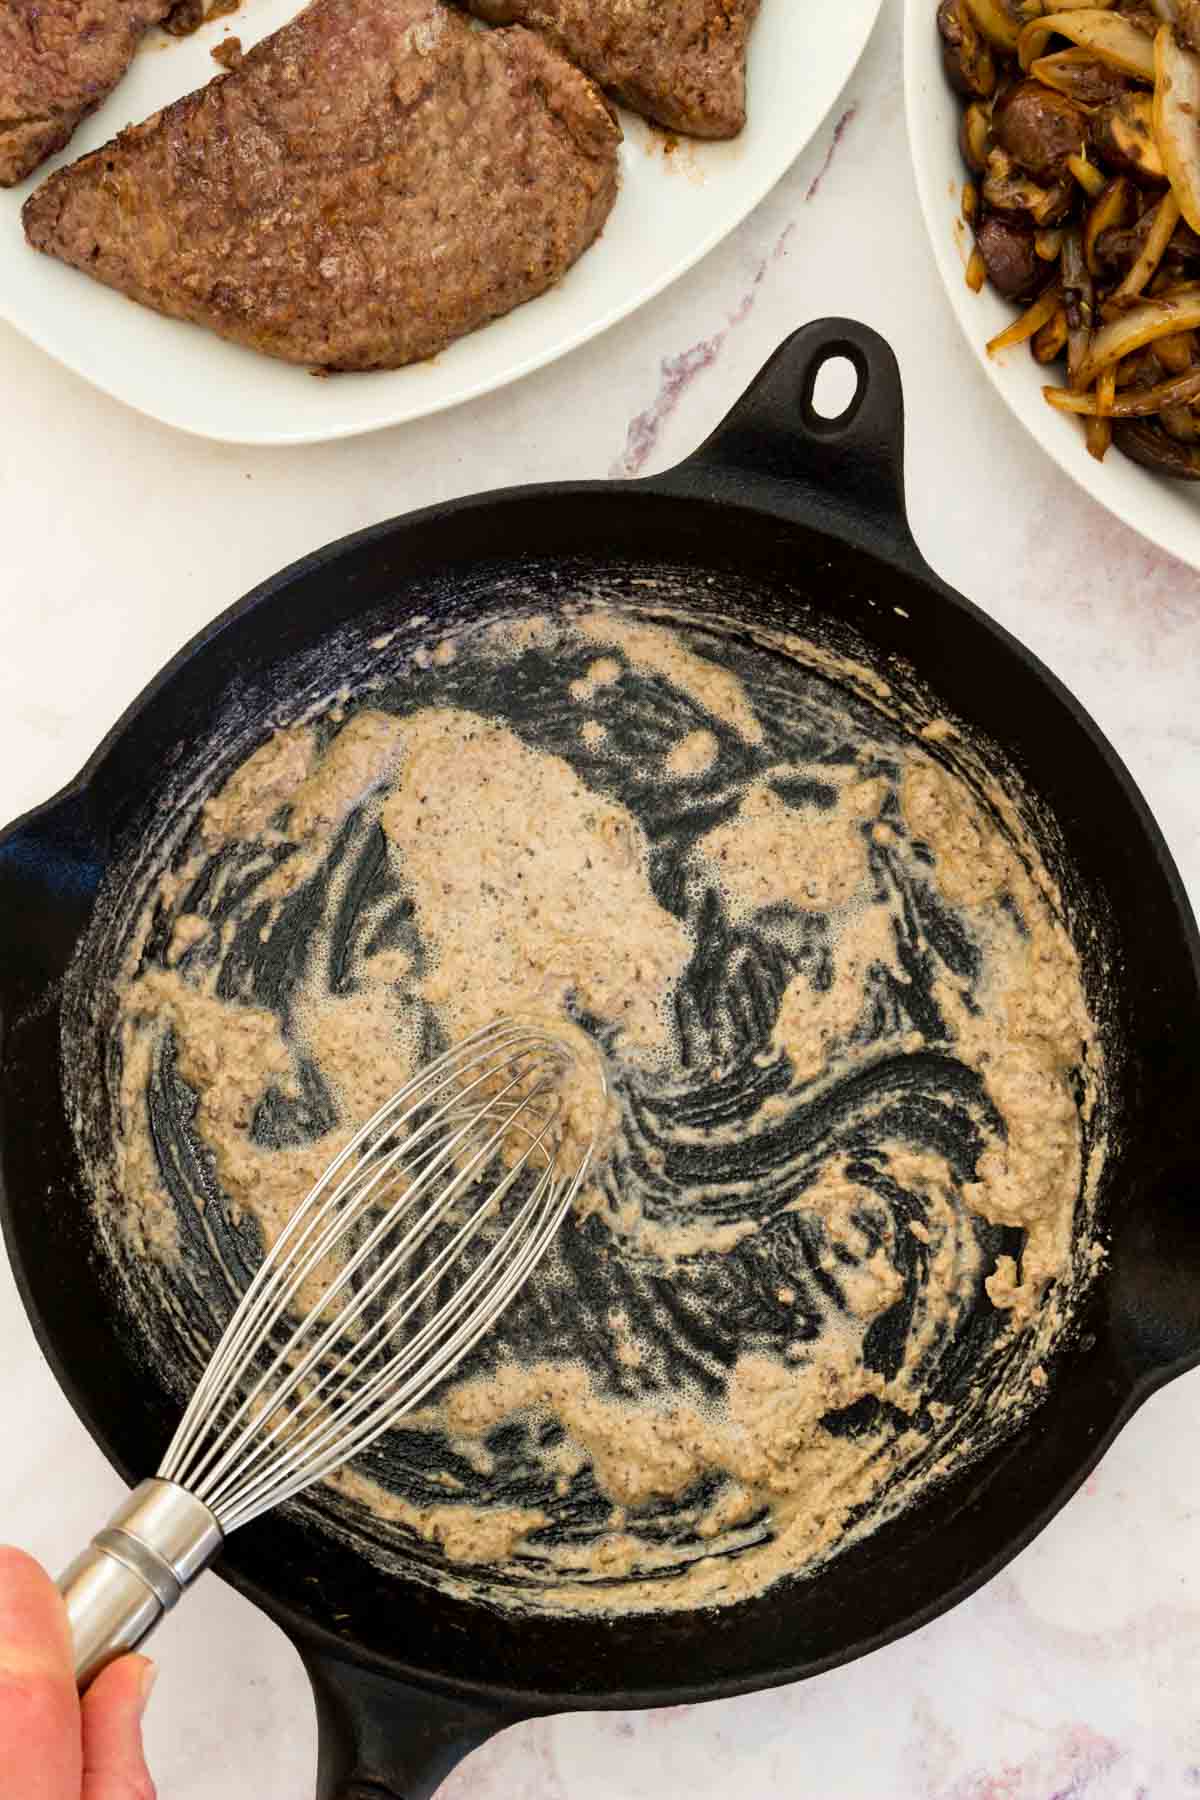 Sweet rice flour is whisked together with melted butter in a skillet.